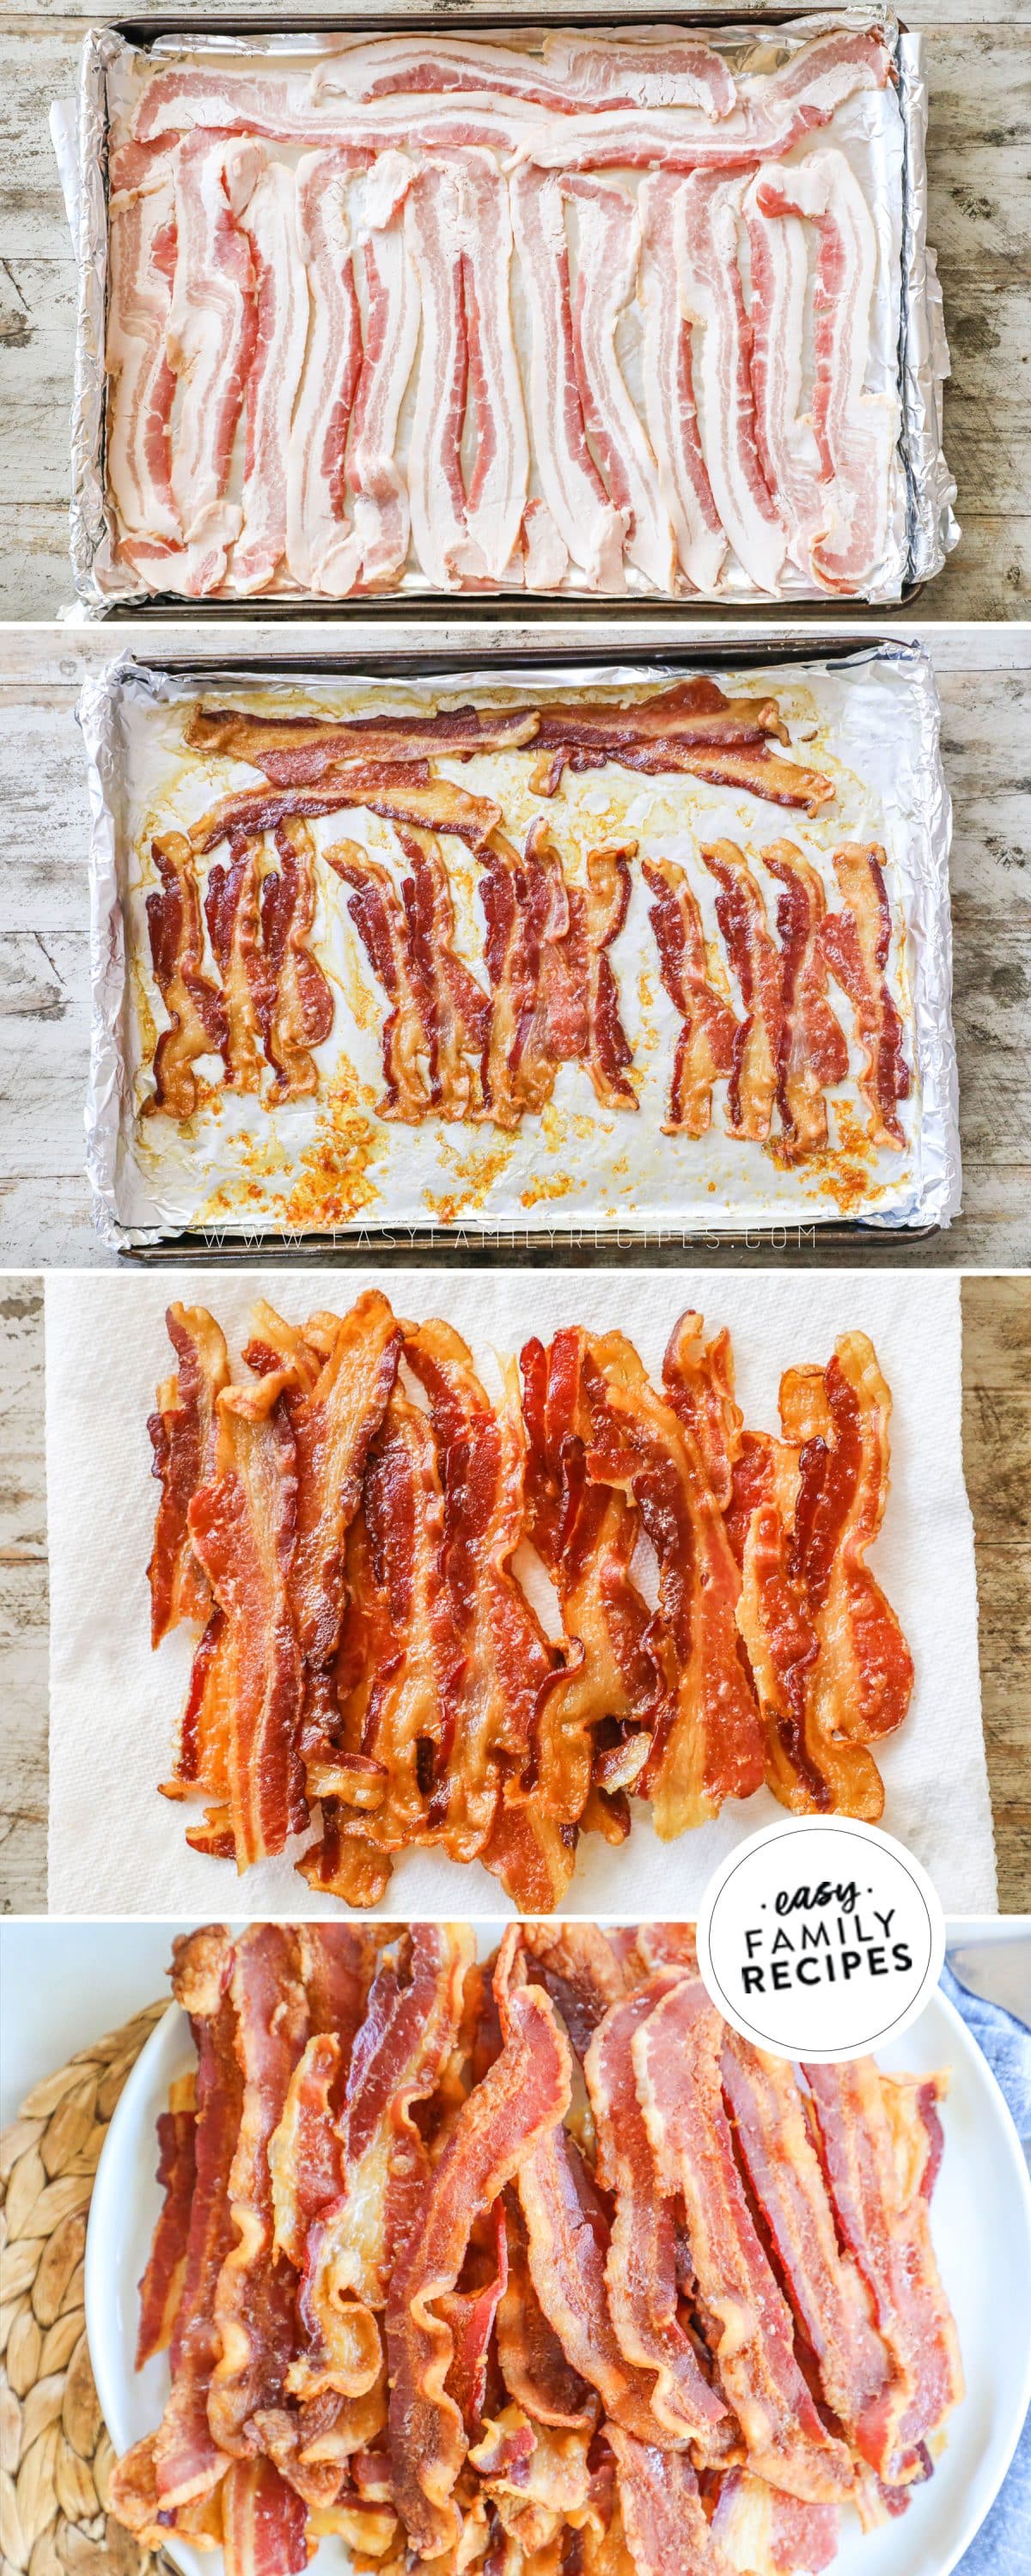 How to Cook Bacon in the Oven - Perfect in 4 Easy Steps